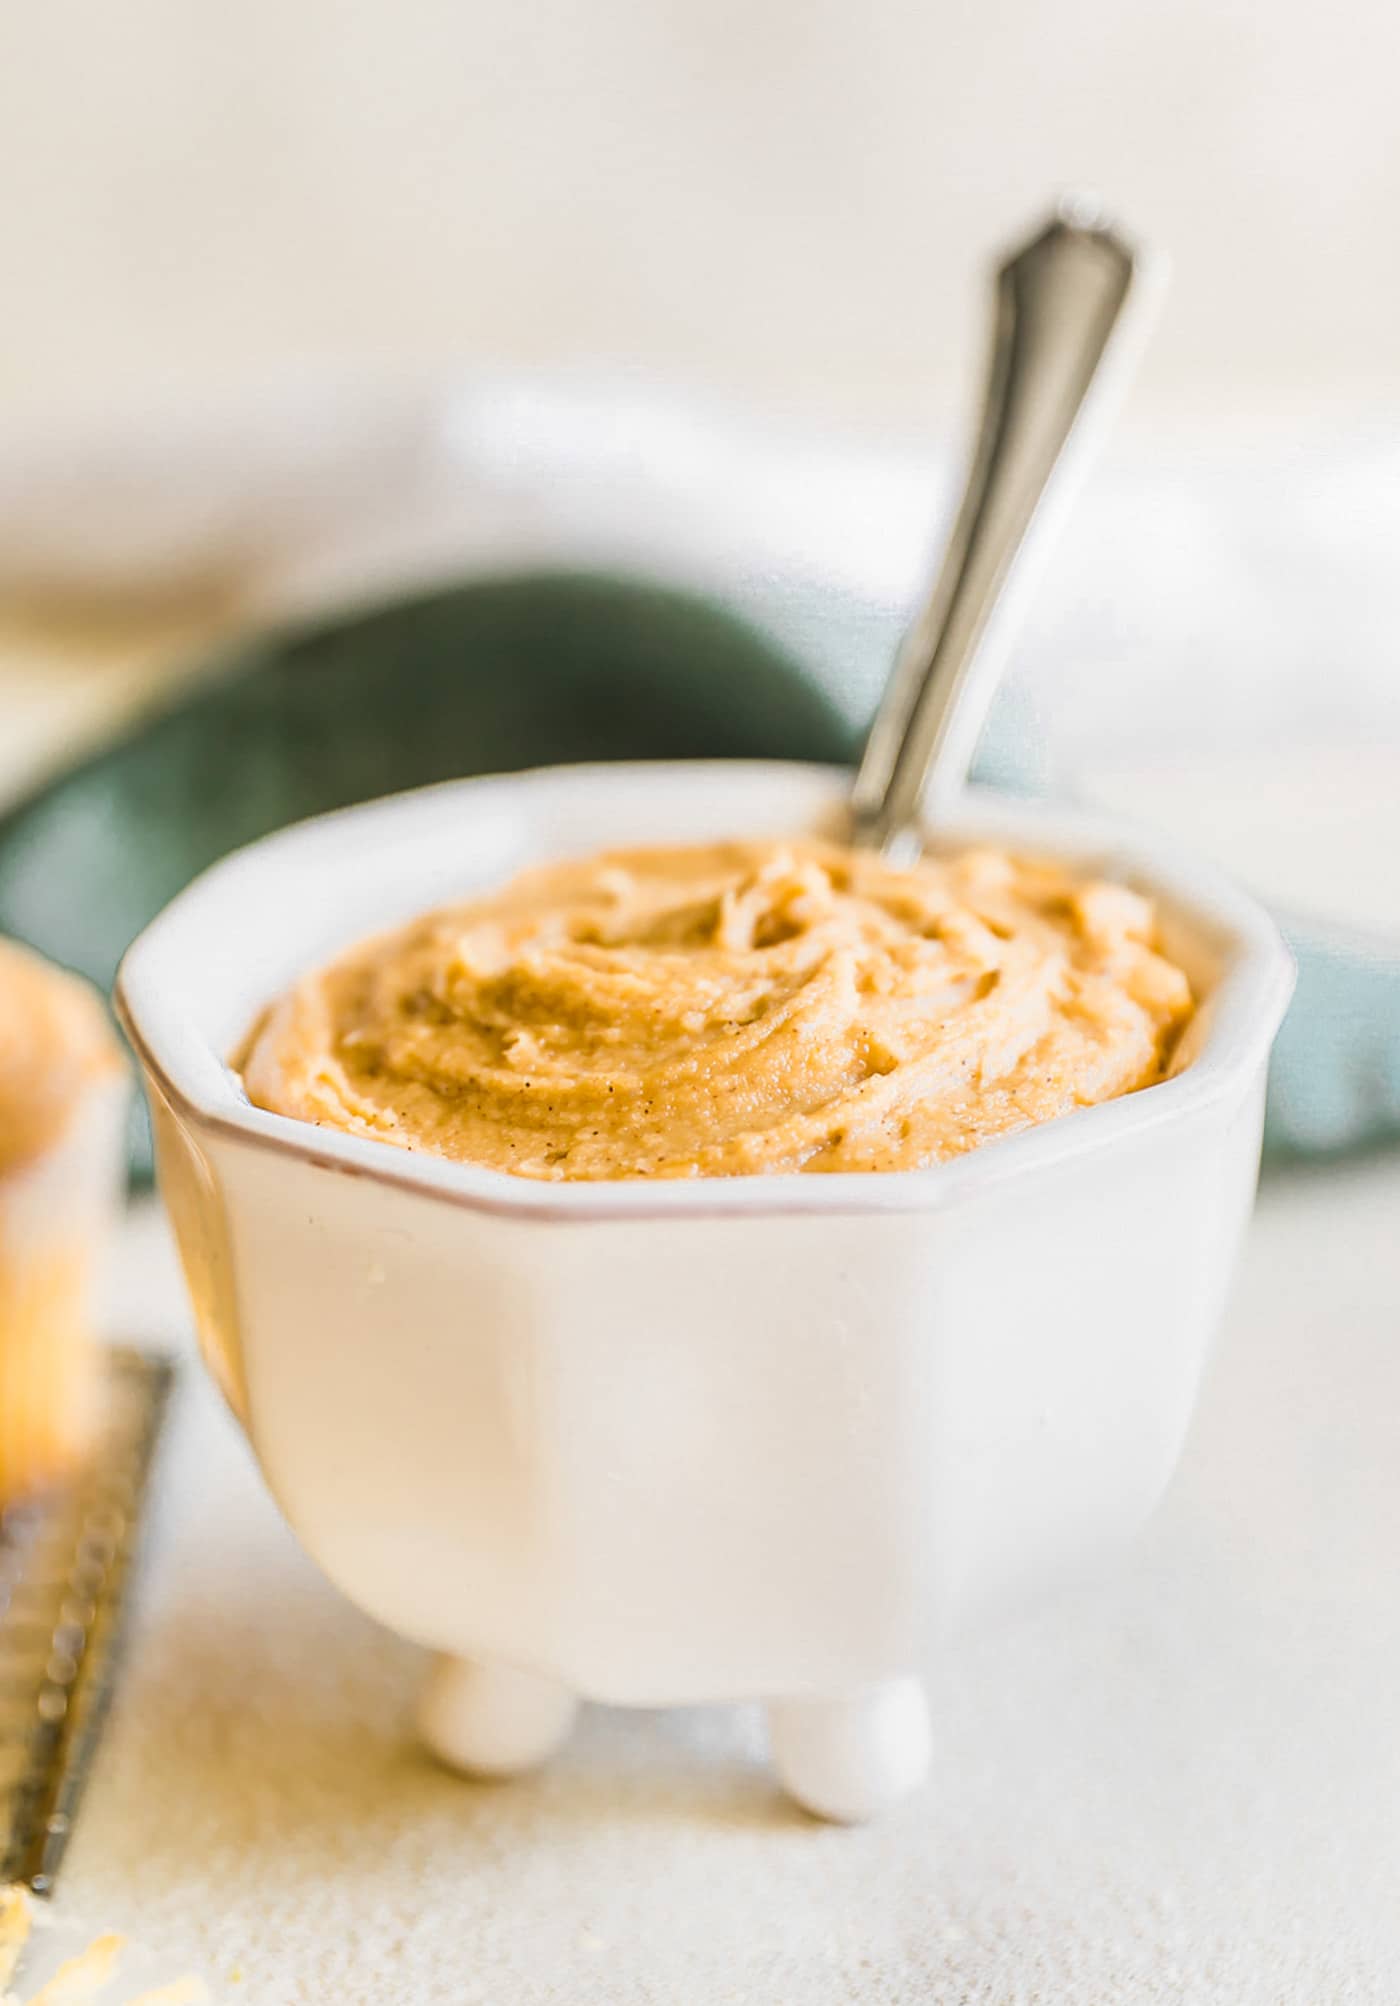 Super Simple and Easy to make Vegan Maple Cashew Cream Cheese Frosting! Paleo friendly and delicious dairy free cream cheese frosting alternative!